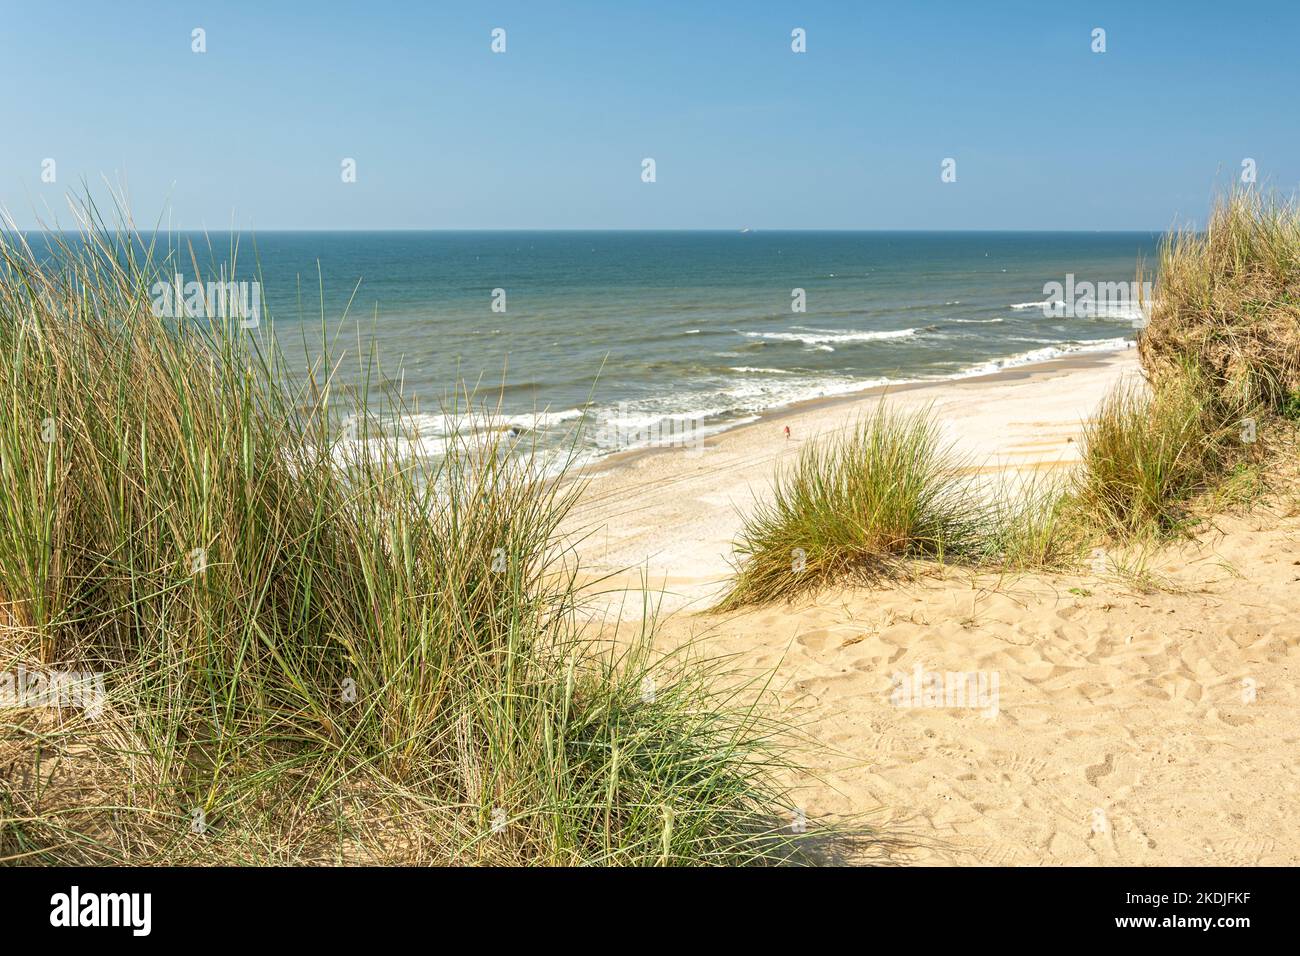 View of the beach and ocean through the dunes on the island of Sylt in Northern Germany Stock Photo